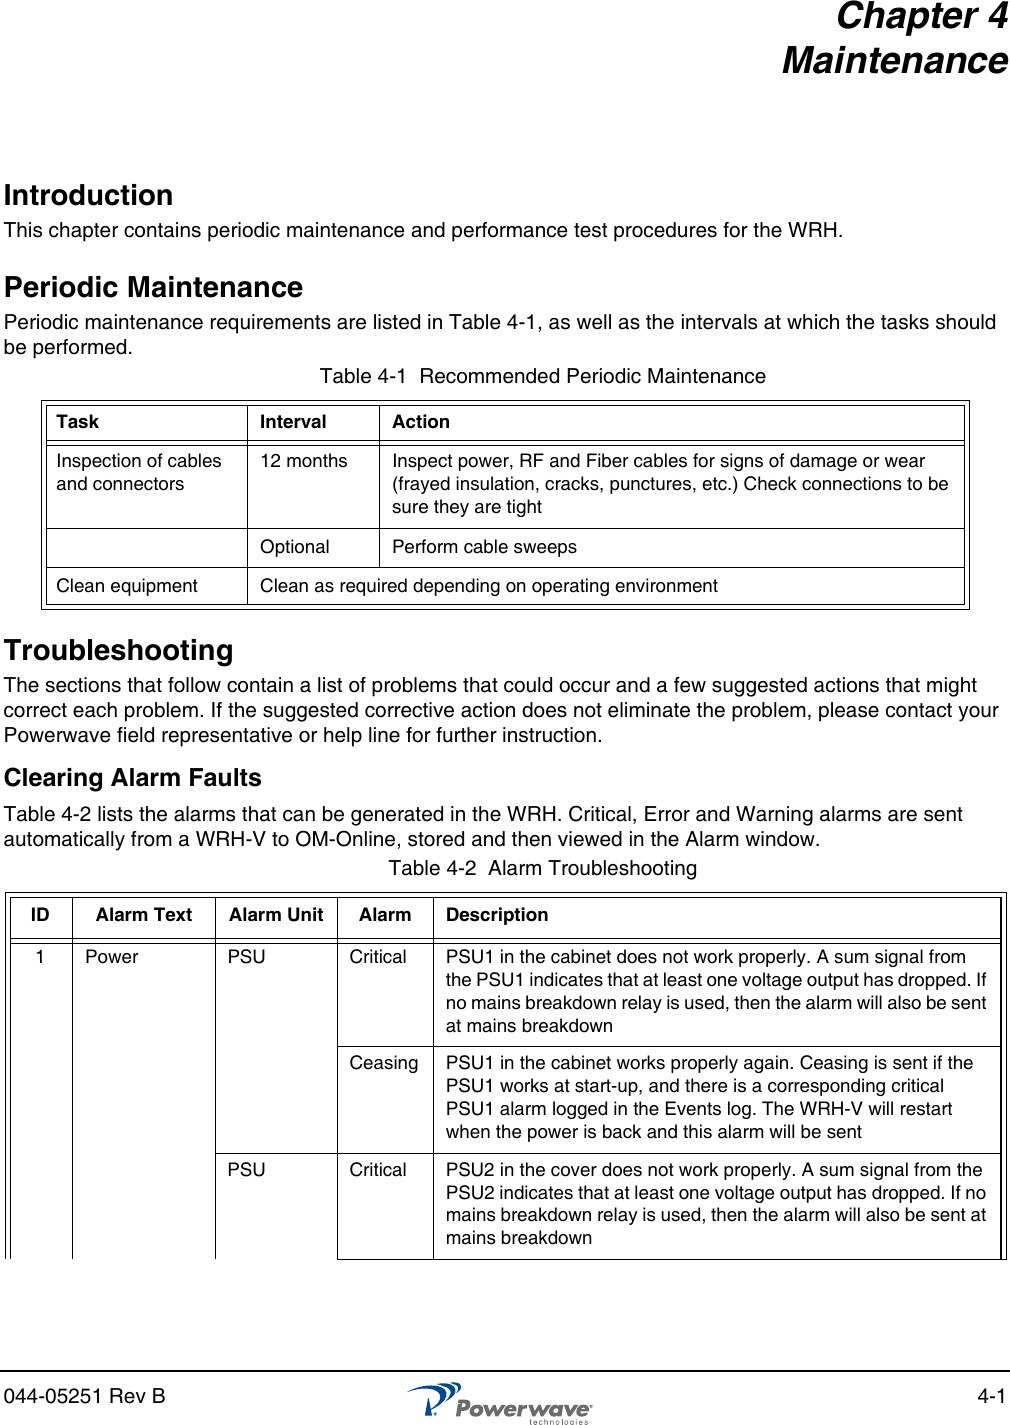 044-05251 Rev B 4-1Chapter 4 MaintenanceIntroductionThis chapter contains periodic maintenance and performance test procedures for the WRH.Periodic MaintenancePeriodic maintenance requirements are listed in Table 4-1, as well as the intervals at which the tasks should be performed.TroubleshootingThe sections that follow contain a list of problems that could occur and a few suggested actions that might correct each problem. If the suggested corrective action does not eliminate the problem, please contact your Powerwave field representative or help line for further instruction.Clearing Alarm FaultsTable 4-2 lists the alarms that can be generated in the WRH. Critical, Error and Warning alarms are sent automatically from a WRH-V to OM-Online, stored and then viewed in the Alarm window.Table 4-1  Recommended Periodic MaintenanceTask Interval ActionInspection of cables and connectors12 months Inspect power, RF and Fiber cables for signs of damage or wear (frayed insulation, cracks, punctures, etc.) Check connections to be sure they are tightOptional Perform cable sweepsClean equipment Clean as required depending on operating environmentTable 4-2  Alarm Troubleshooting ID Alarm Text Alarm Unit Alarm Description1 Power PSU Critical PSU1 in the cabinet does not work properly. A sum signal from the PSU1 indicates that at least one voltage output has dropped. If no mains breakdown relay is used, then the alarm will also be sent at mains breakdownCeasing PSU1 in the cabinet works properly again. Ceasing is sent if the PSU1 works at start-up, and there is a corresponding critical PSU1 alarm logged in the Events log. The WRH-V will restart when the power is back and this alarm will be sentPSU Critical PSU2 in the cover does not work properly. A sum signal from the PSU2 indicates that at least one voltage output has dropped. If no mains breakdown relay is used, then the alarm will also be sent at mains breakdown